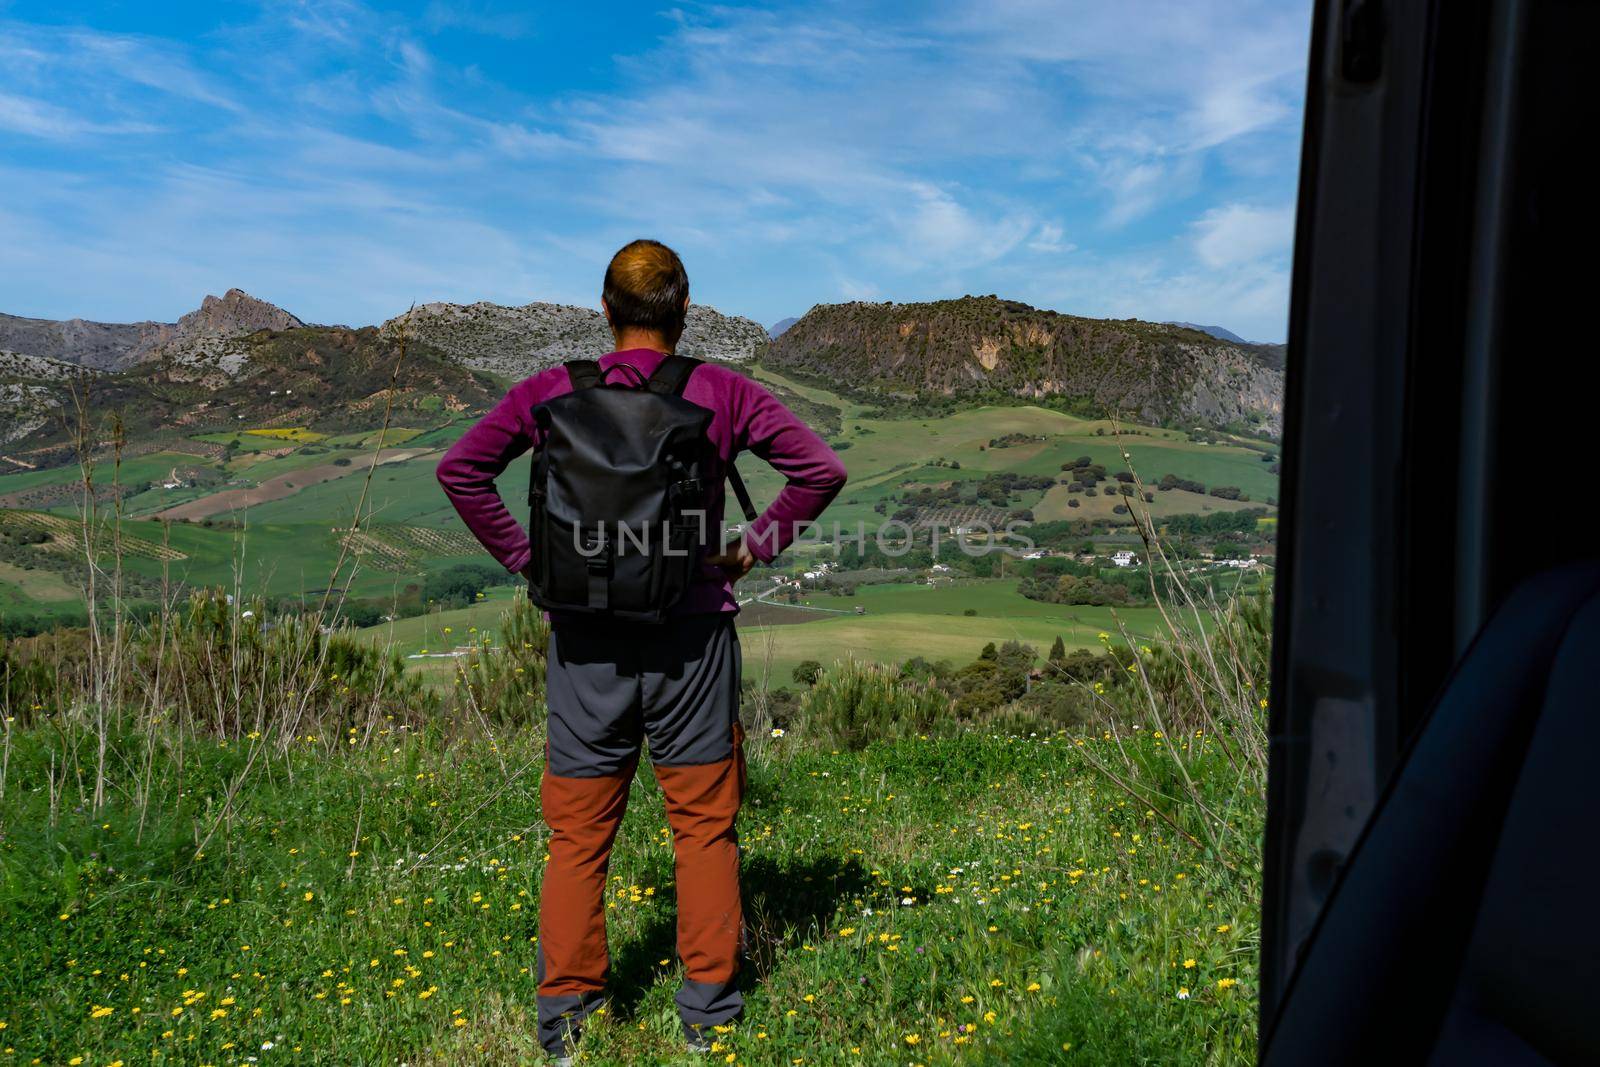 man on his back with backpack observing the mountainous landscape with cloudy sky seen from inside his van